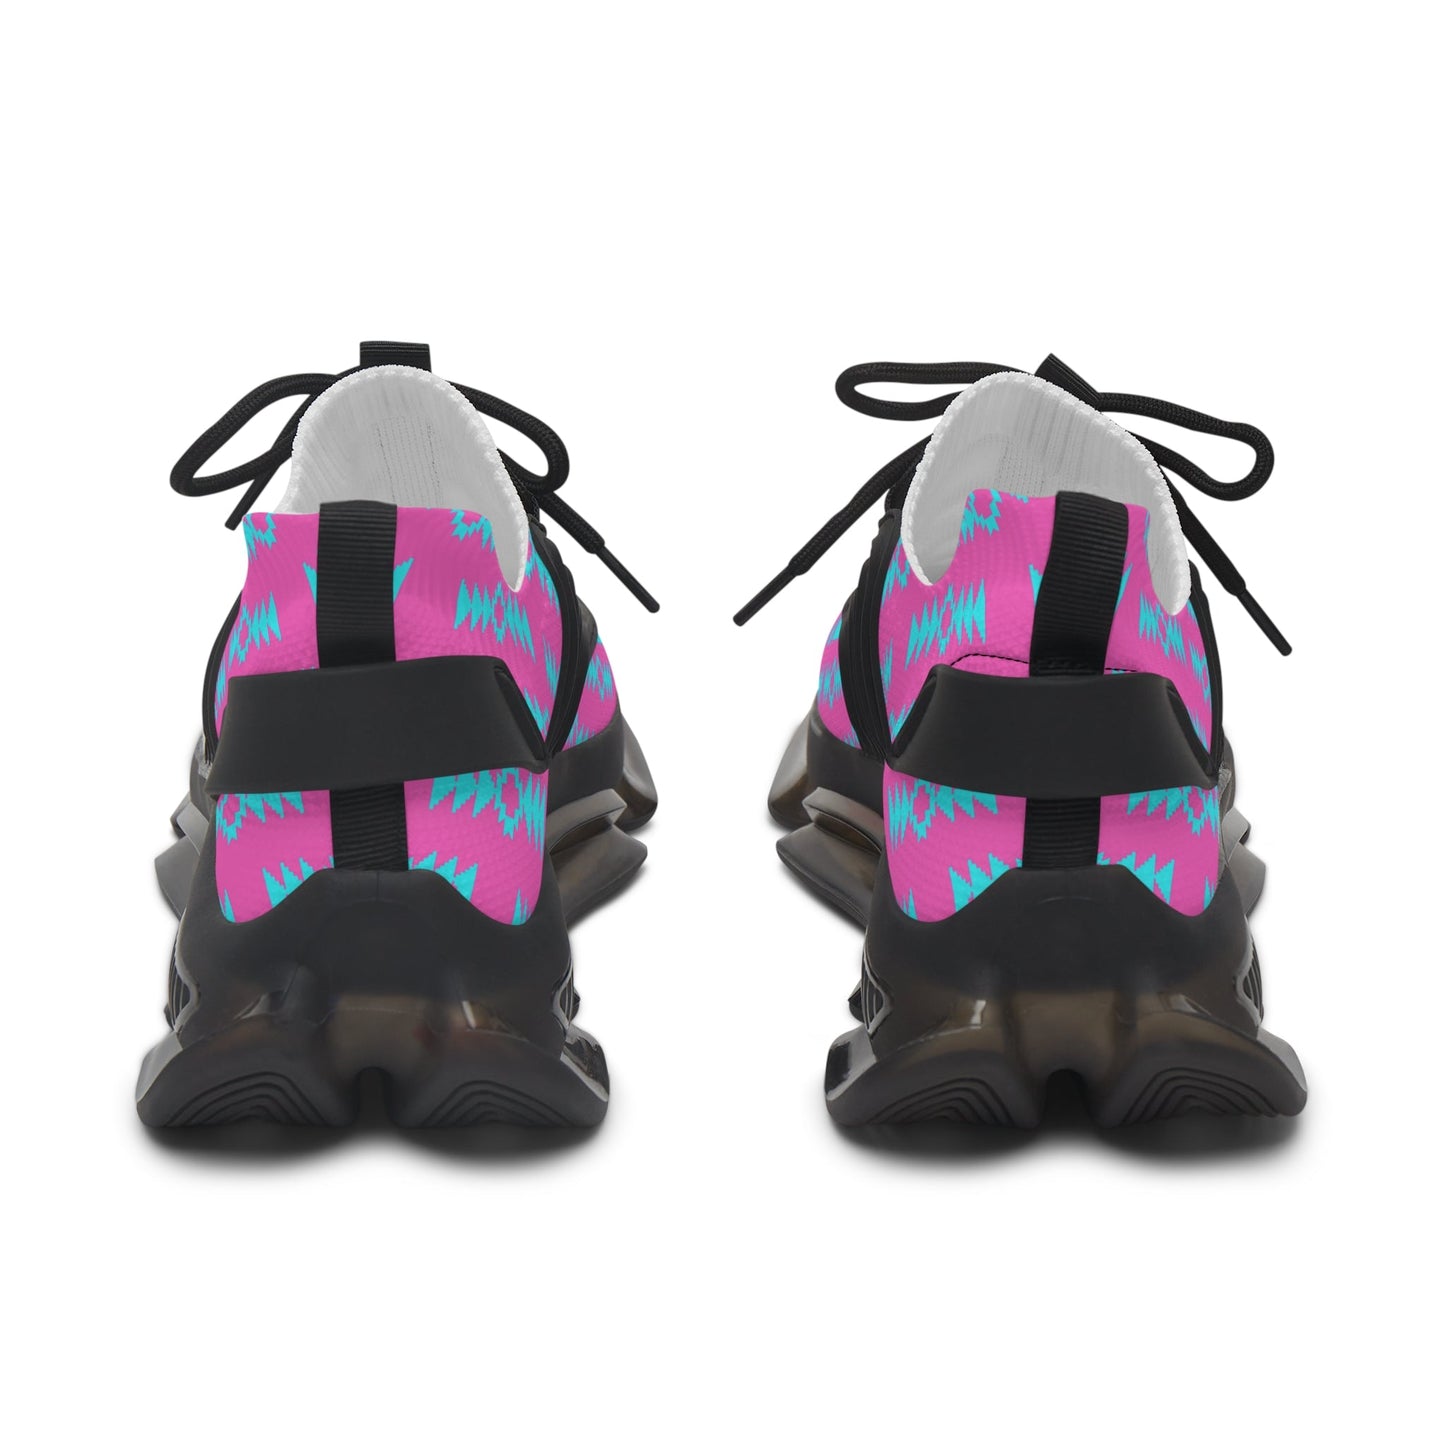 Women's Native Pink and Blue Mesh Sneakers - Nikikw Designs